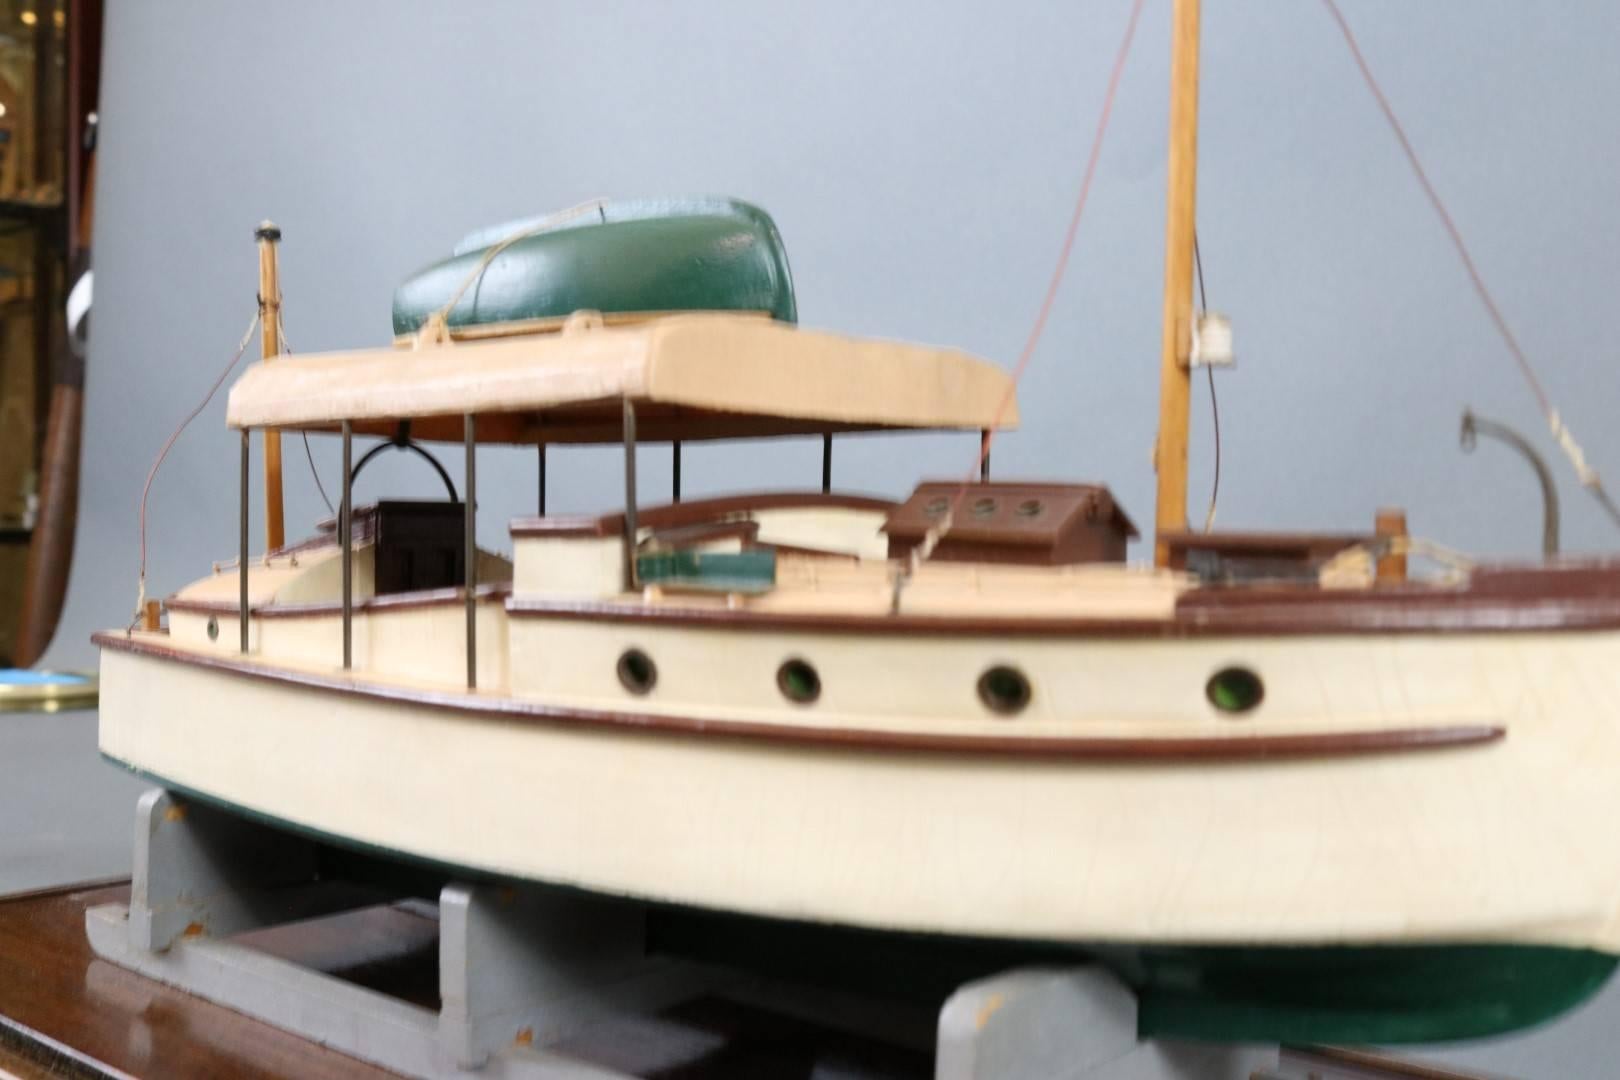 Finely crafted builder's model of a Gray Marine yacht, built in Maine in the 1920s. From a family descendant. Dimensions: 19" L x 9" W x 12.5" H (case).